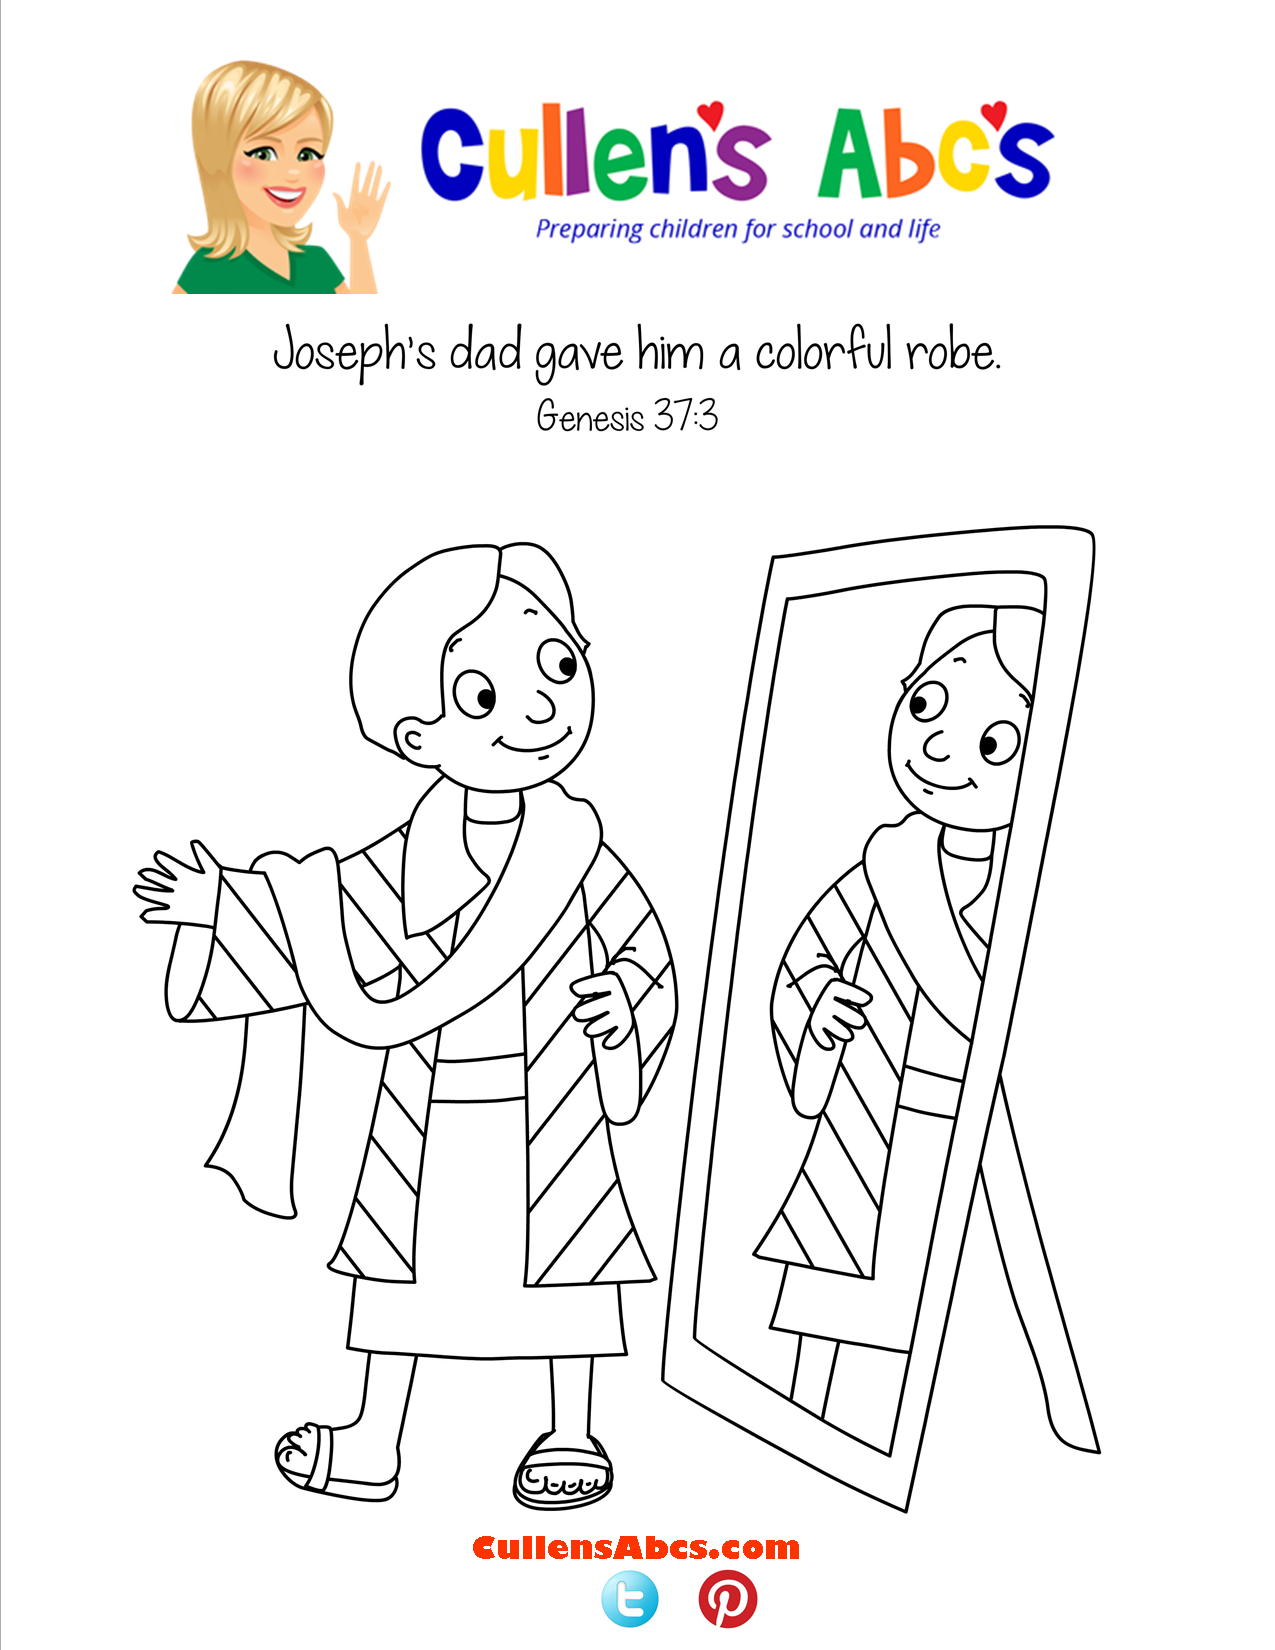 Bible memory verse coloring page josephs colorful robe free childrens videos activities